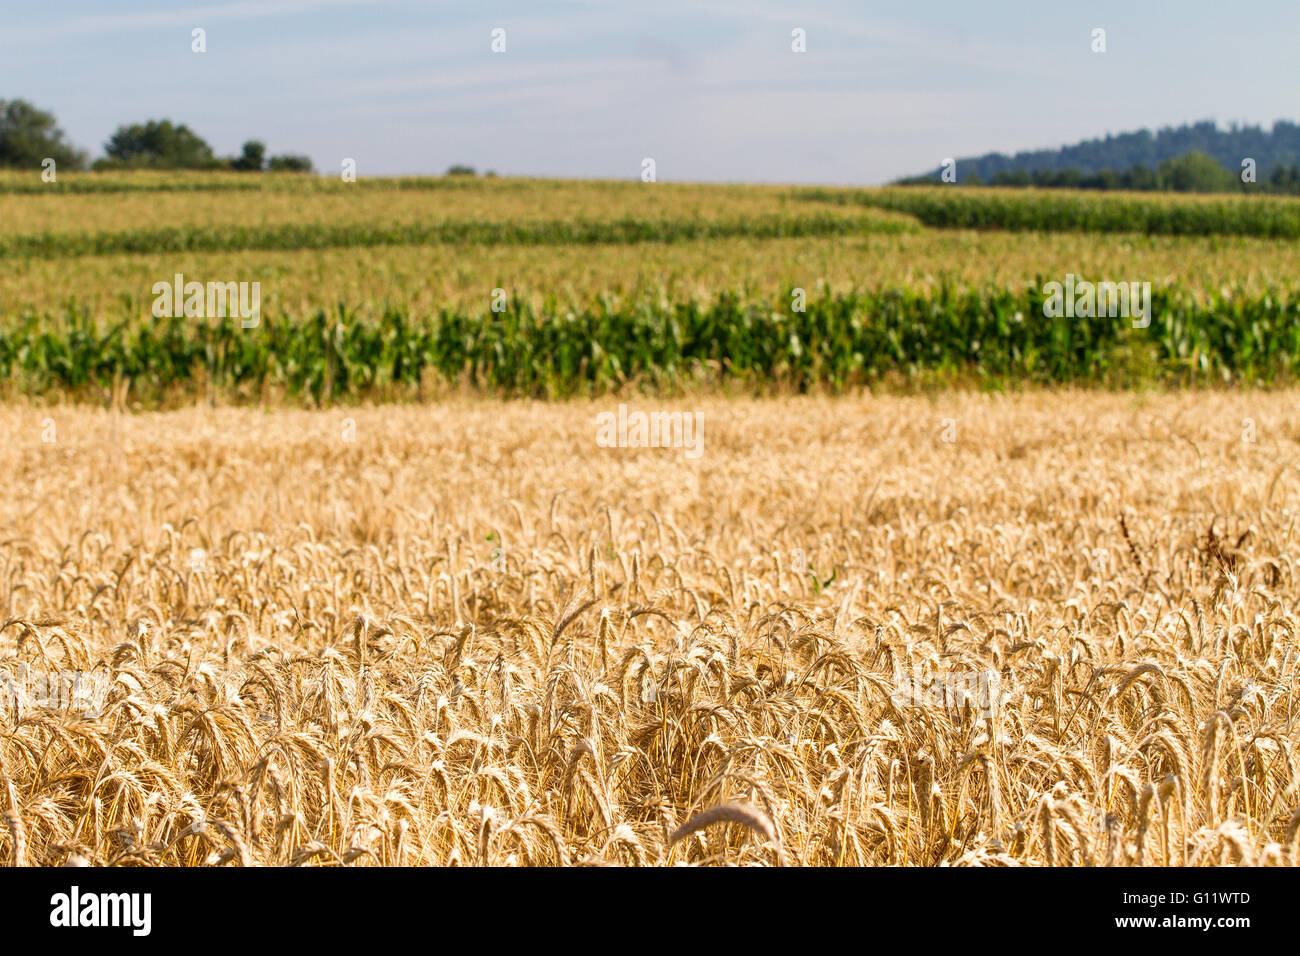 Field full of rye (Secale cereale) Stock Photo